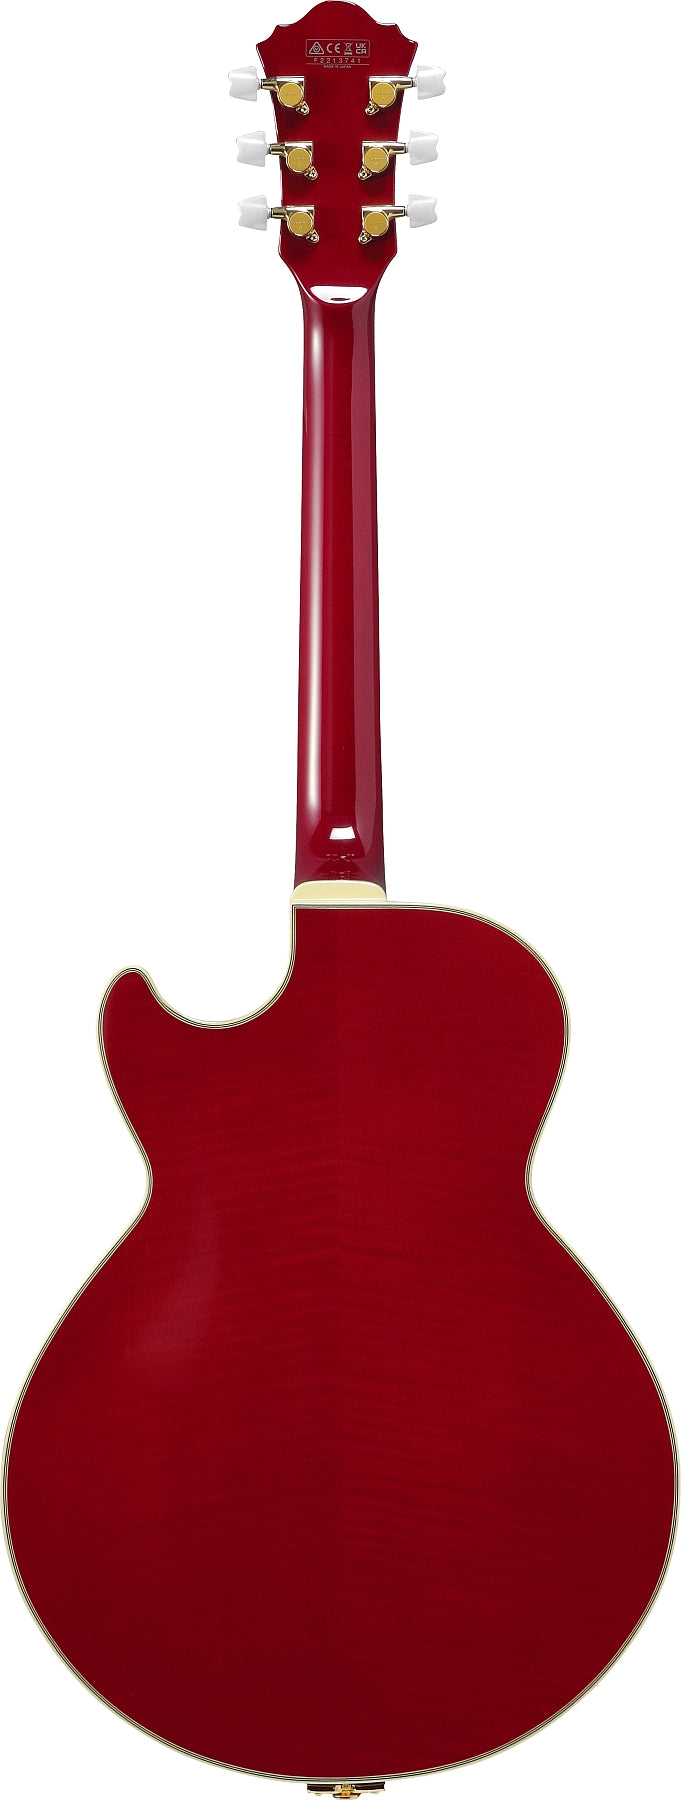 Ibanez GEORGE BENSON Signature Electric Guitar (Red)